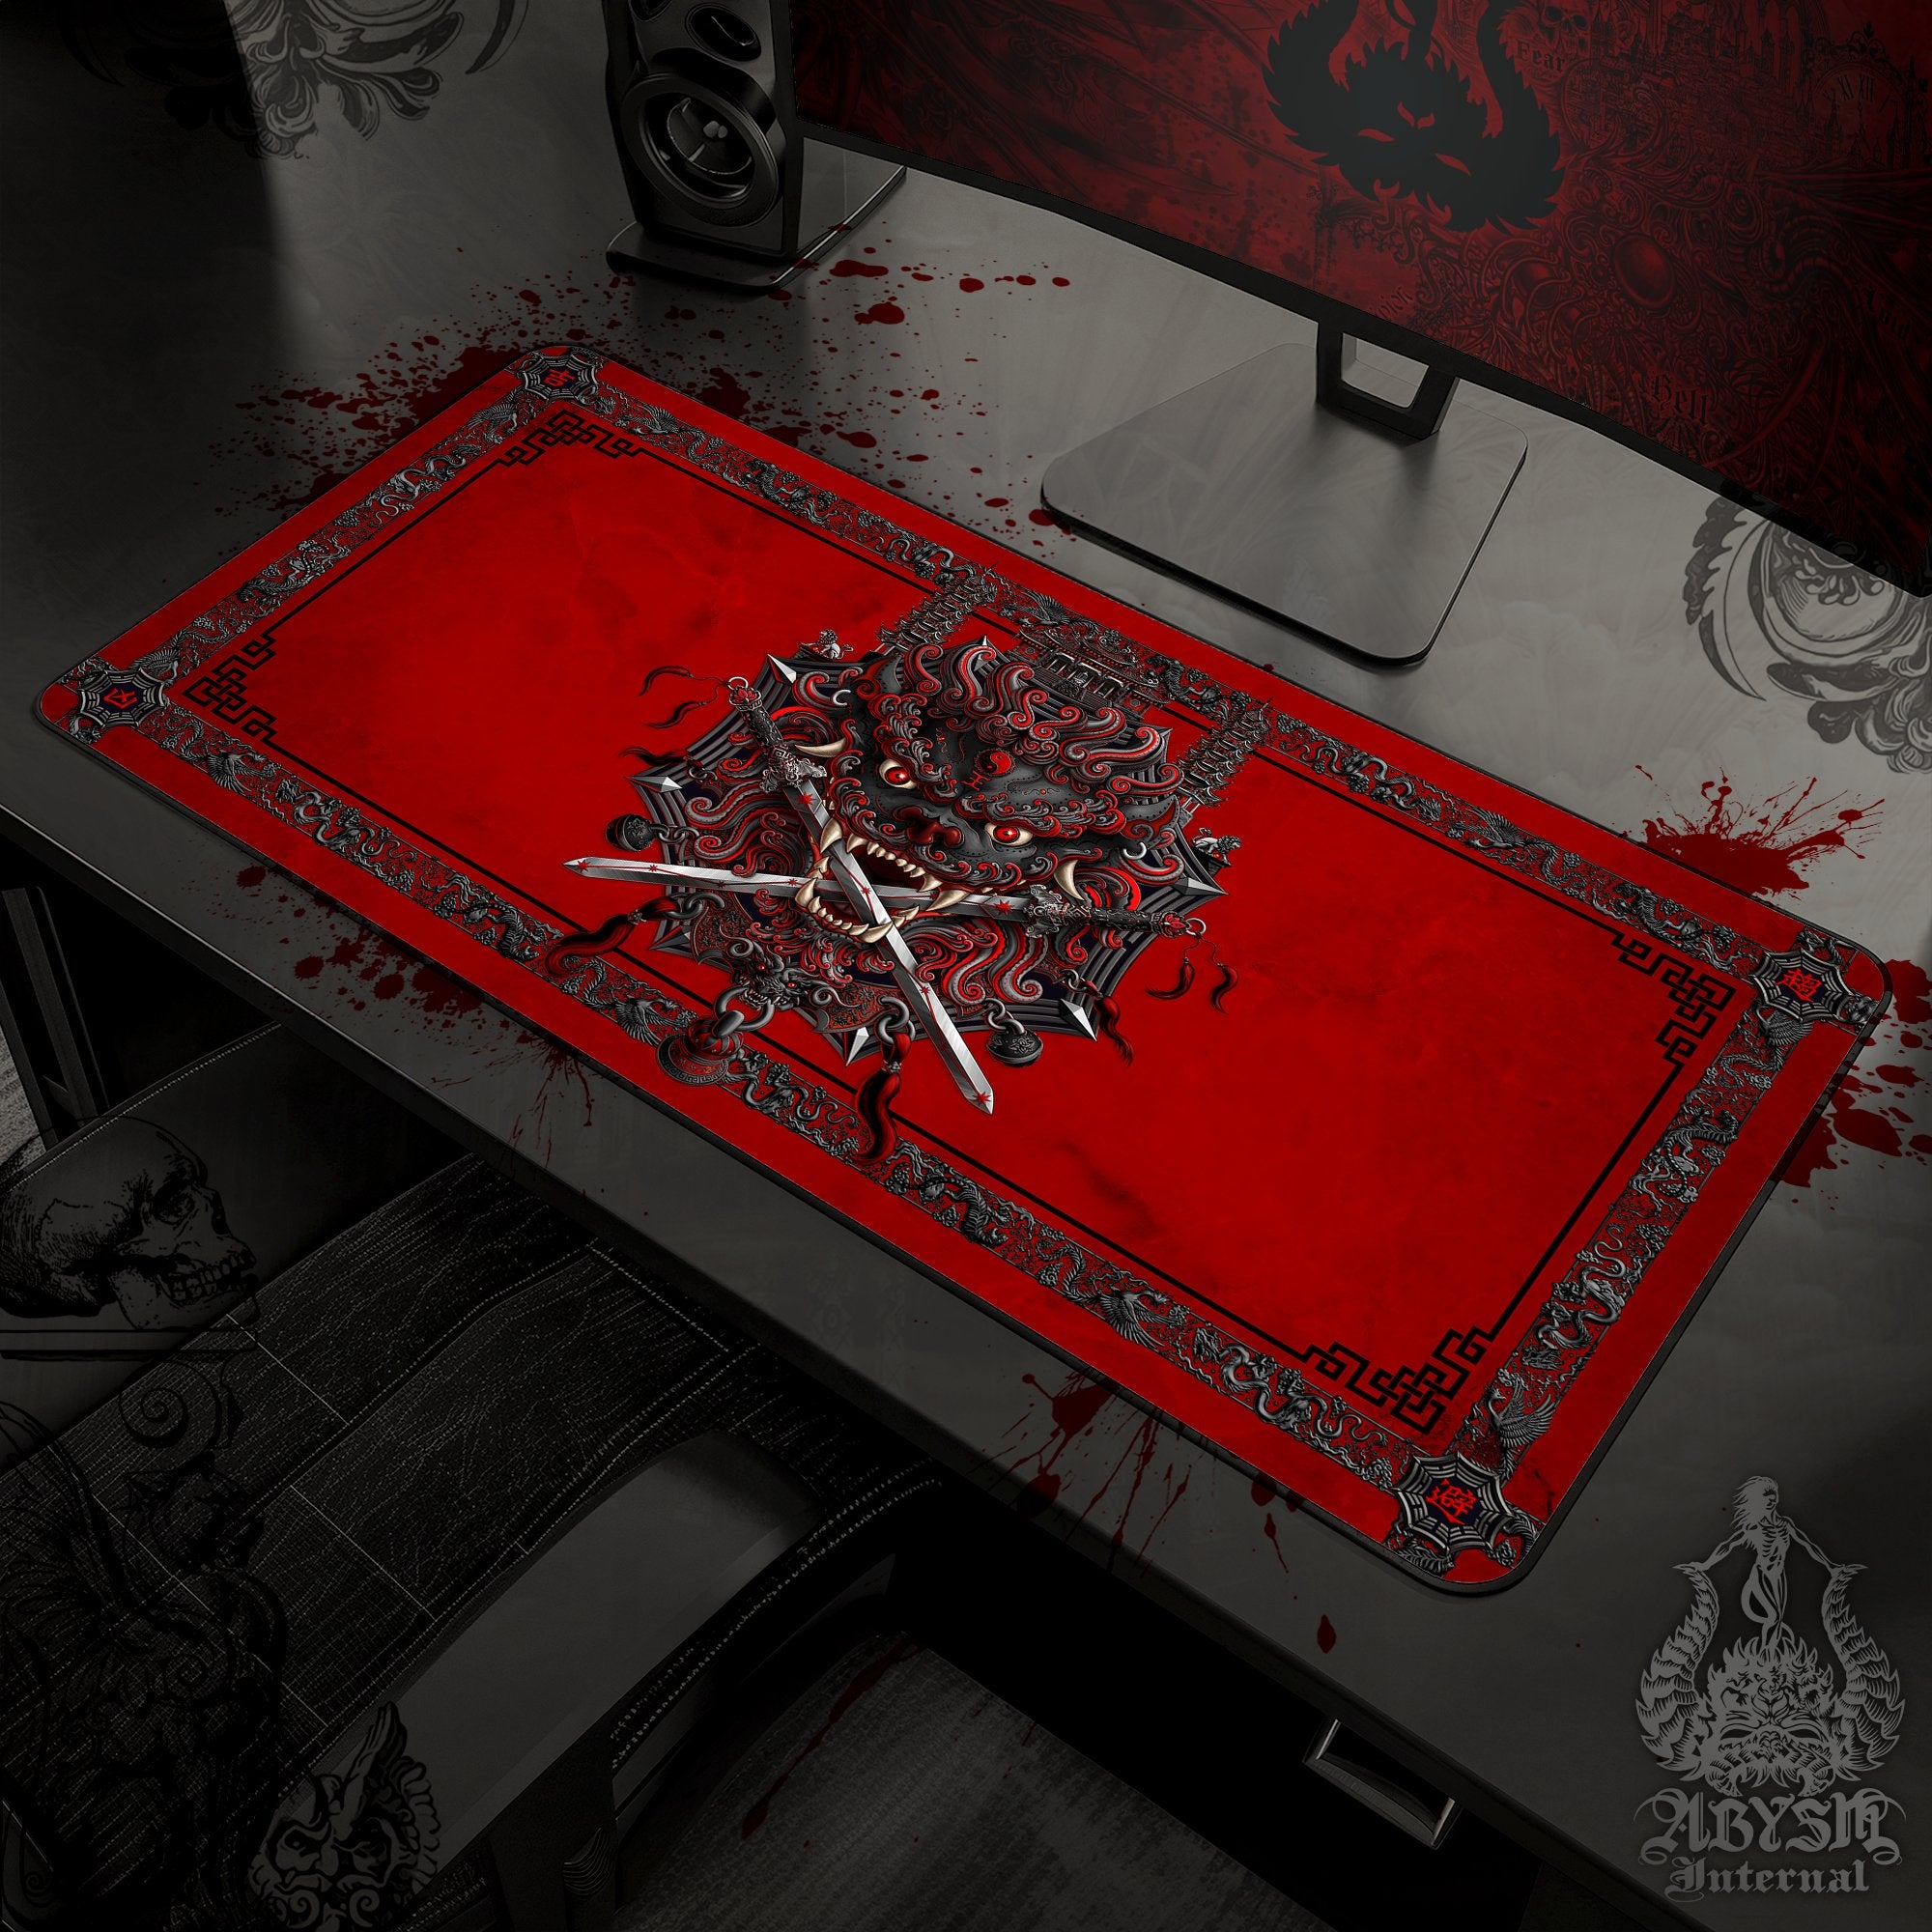 Gothic Lion Desk Mat, Asian Gaming Mouse Pad, Taiwan Table Protector Cover, Chinese Workpad, Fantasy Art Print - Bloody Red and Black - Abysm Internal